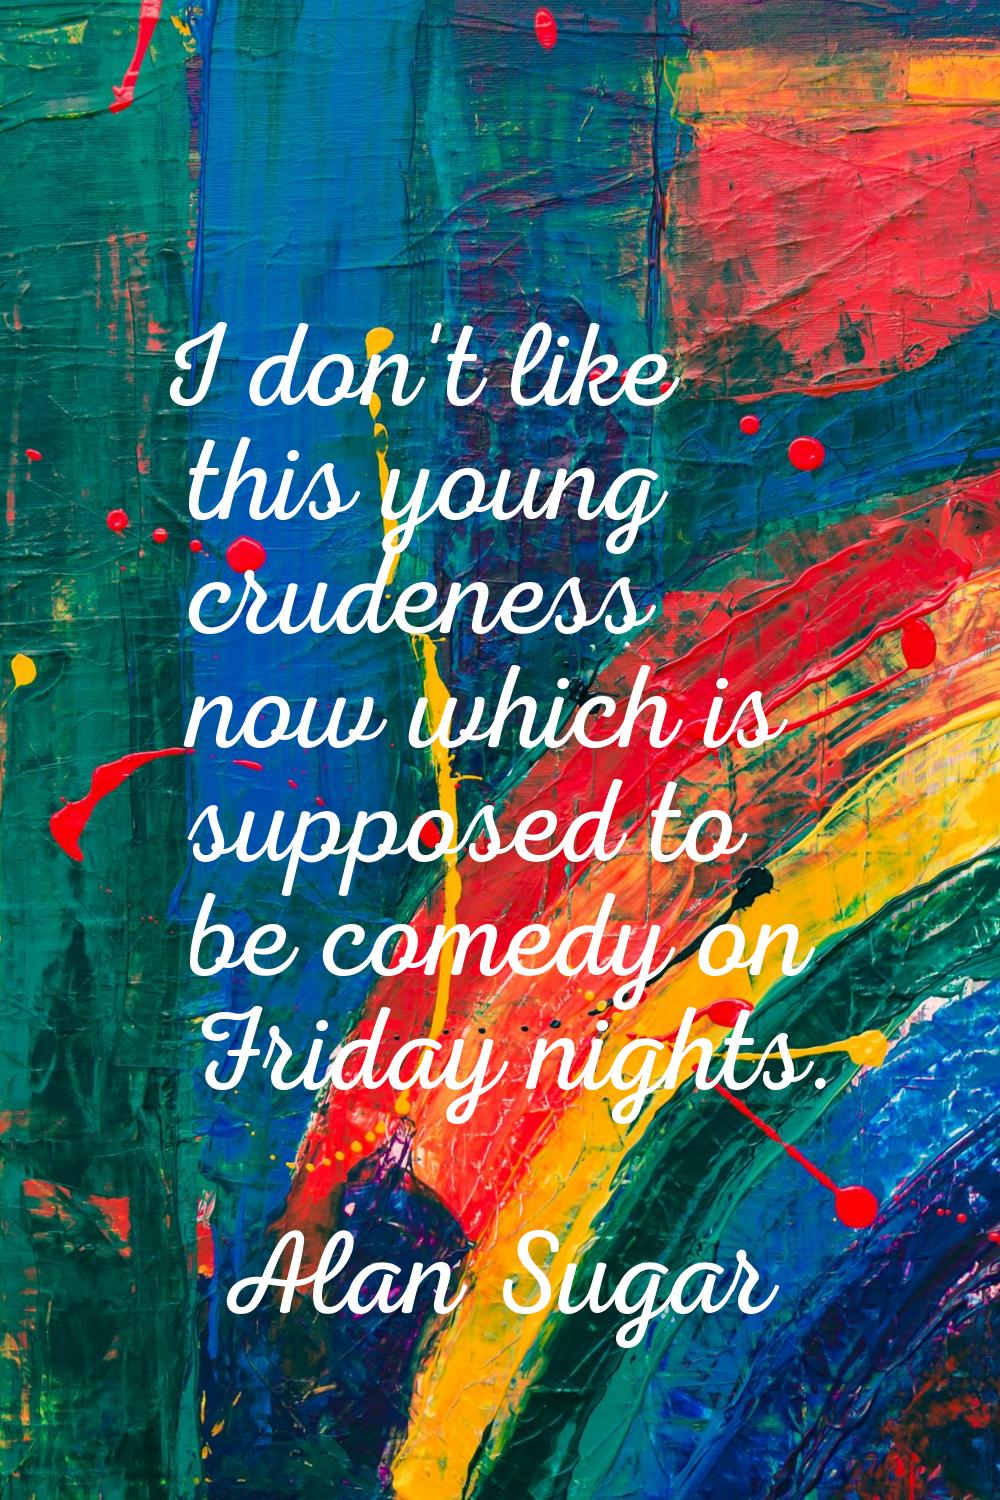 I don't like this young crudeness now which is supposed to be comedy on Friday nights.